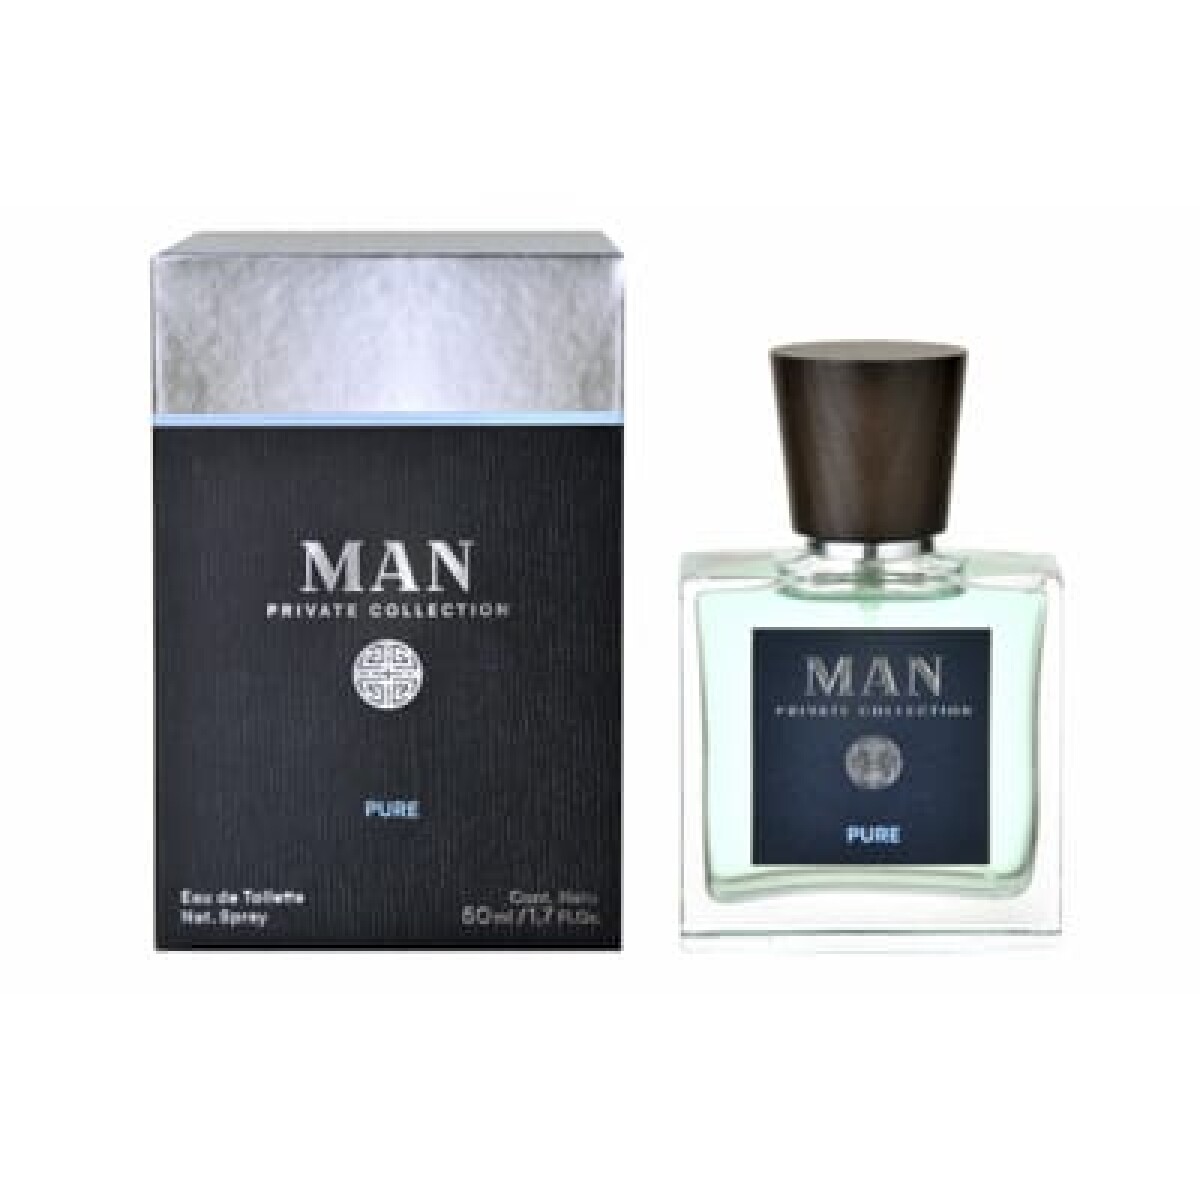 Perfume Man Private Collection Pure Edt 50 ml 